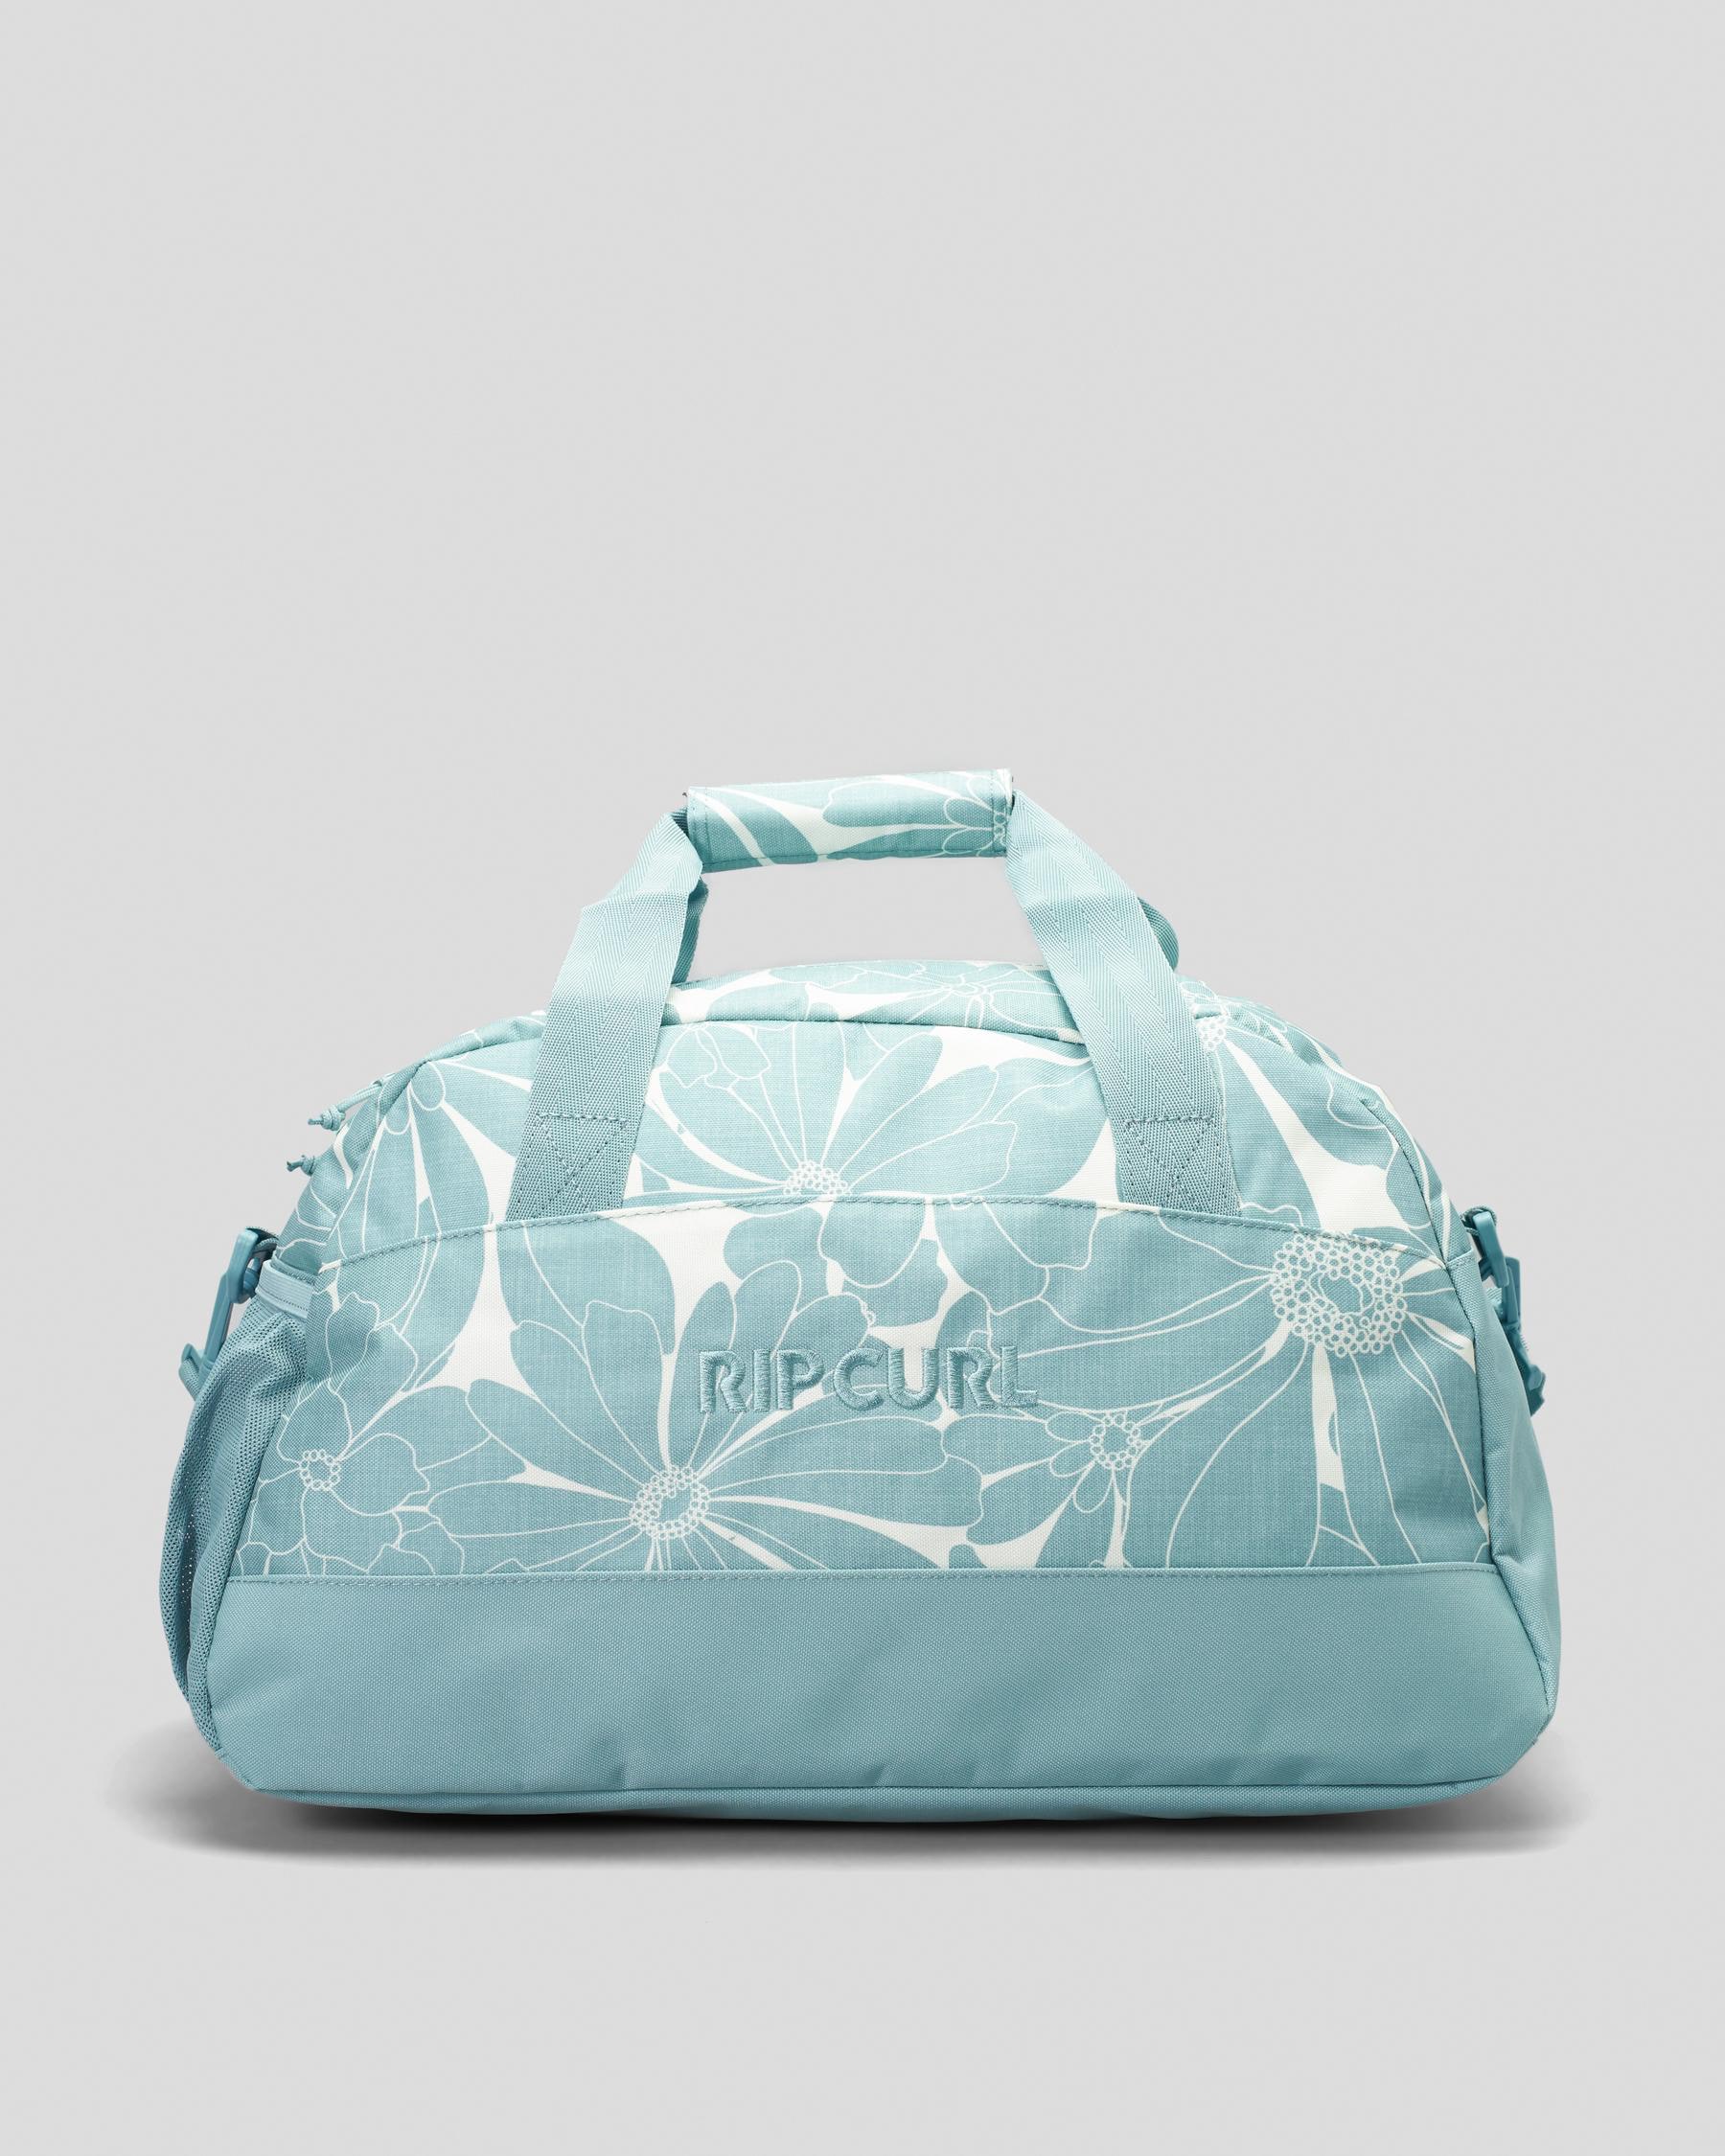 RIP CURL BAGS COLLECTION DISTRIBUTED EUROPE & AUSTRALIA on Behance